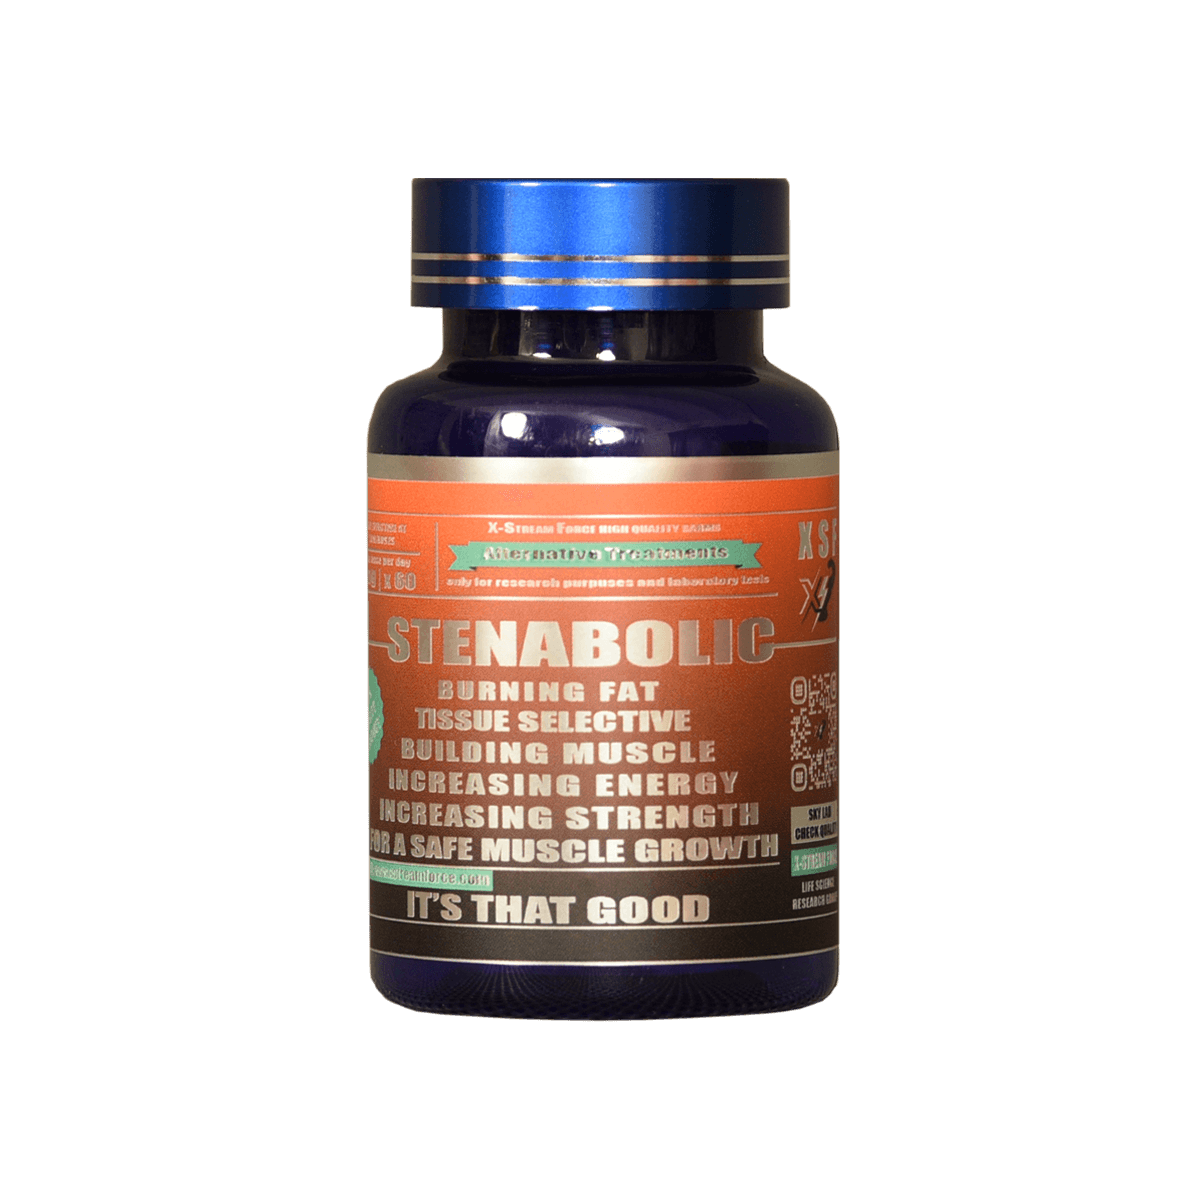 stenabolic-sr9009-capsules-60-10mg-muscle shop-xstreamforce-for recomp-fat cleaner-muscle builder-stamina-energy✦sr9009 sarms✦ fitness supplements-muscle-hunter